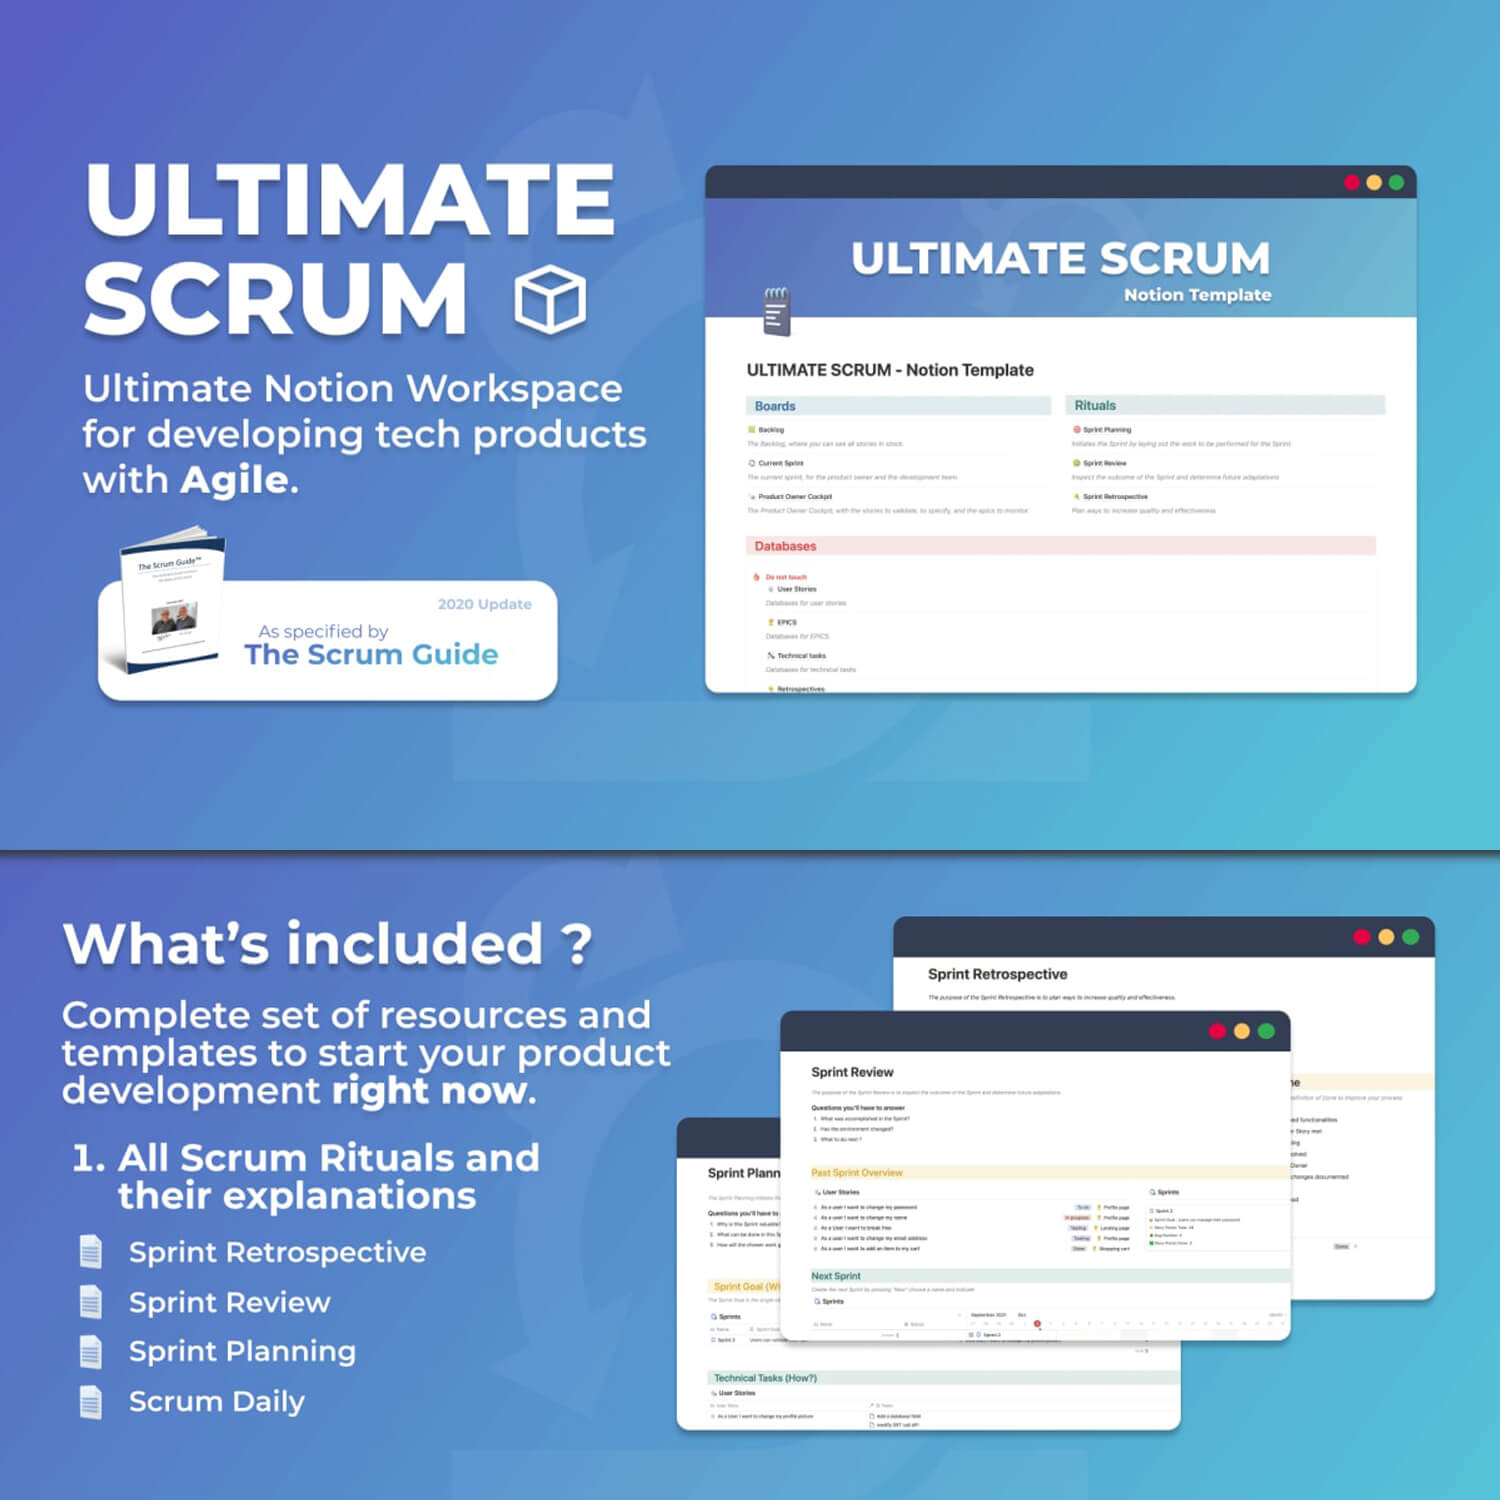 Information about Ultimate Scrum.